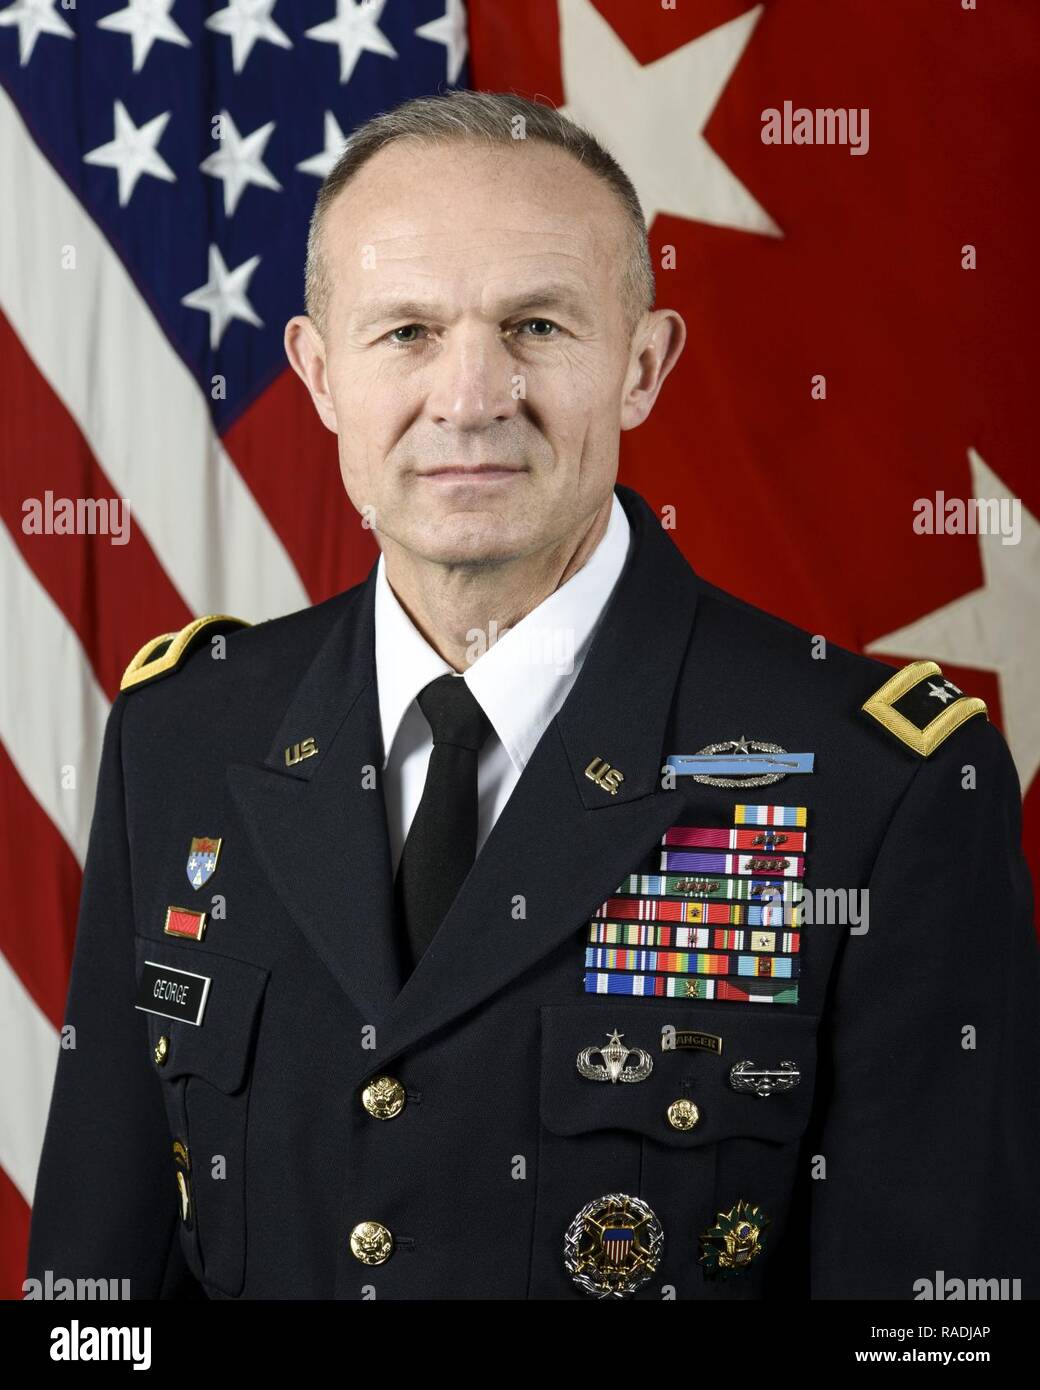 Chief of Staff of the Army, General Randy A. George